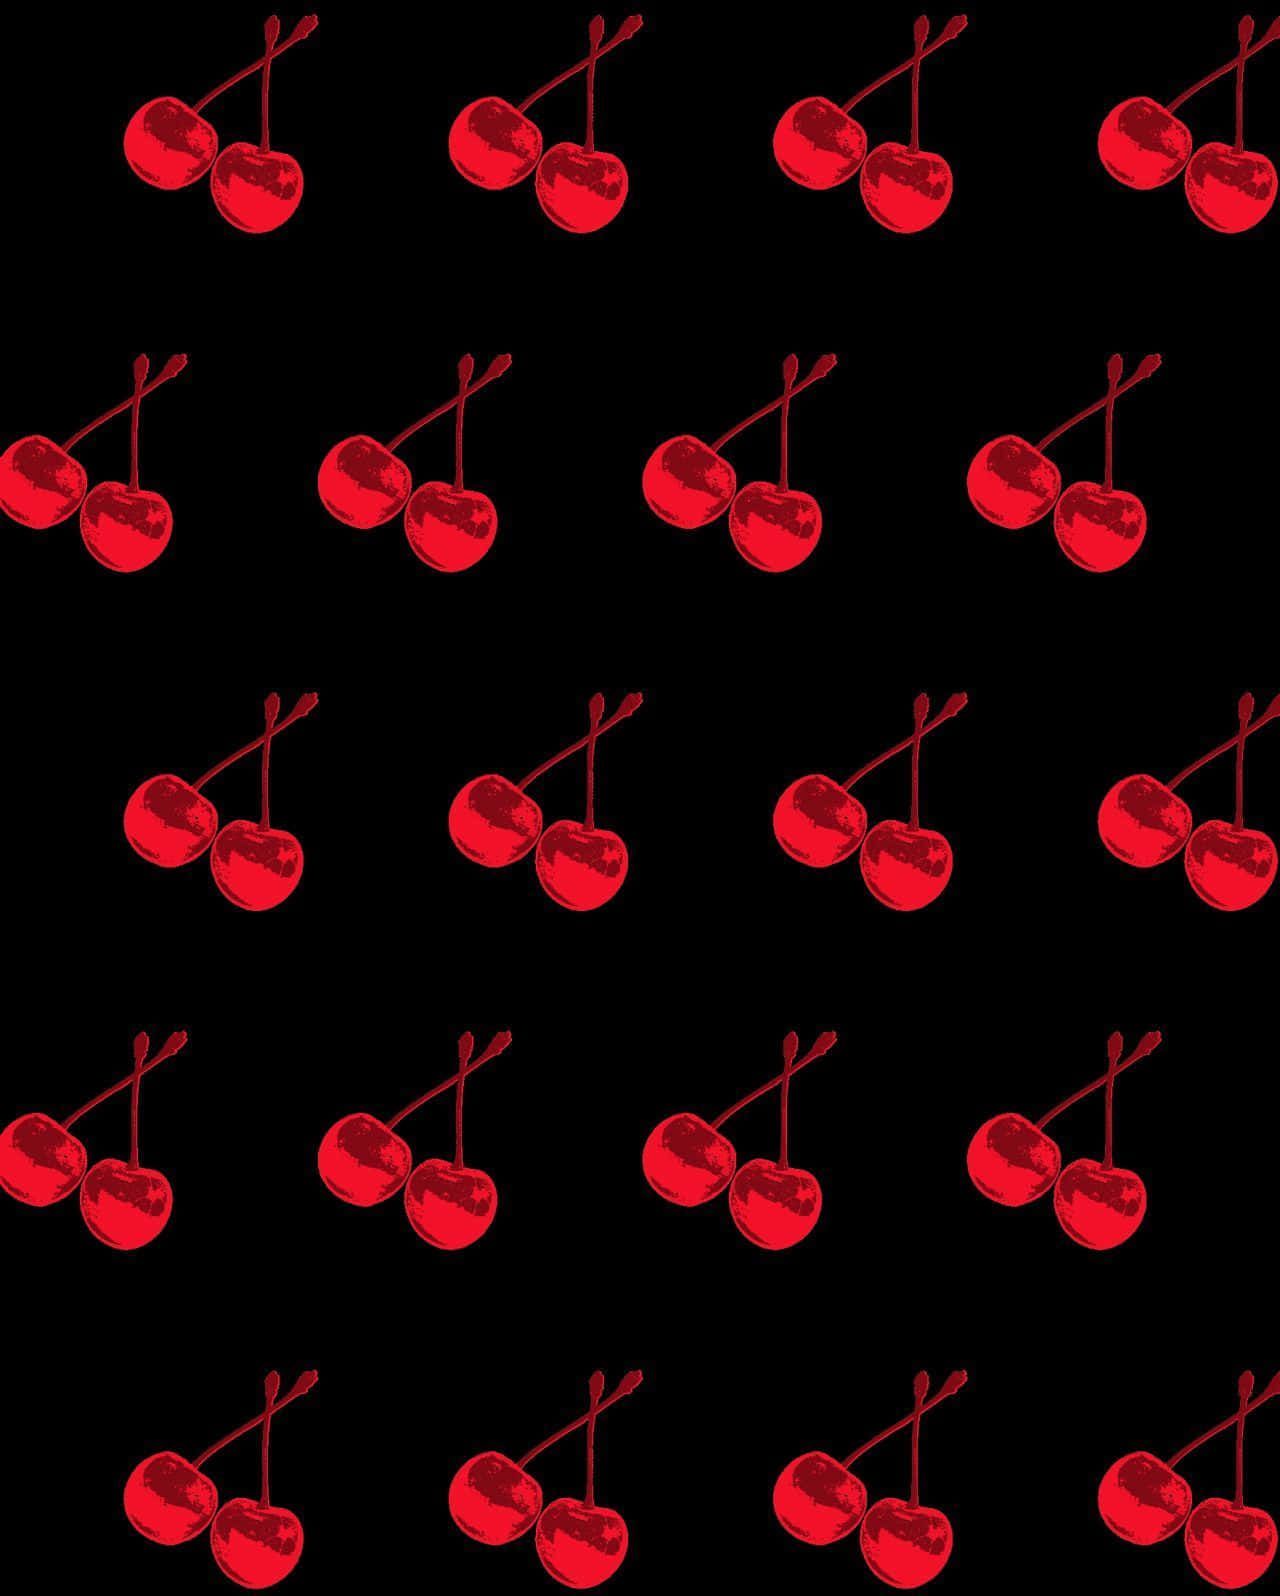 A pattern of red cherries on a black background - Cherry